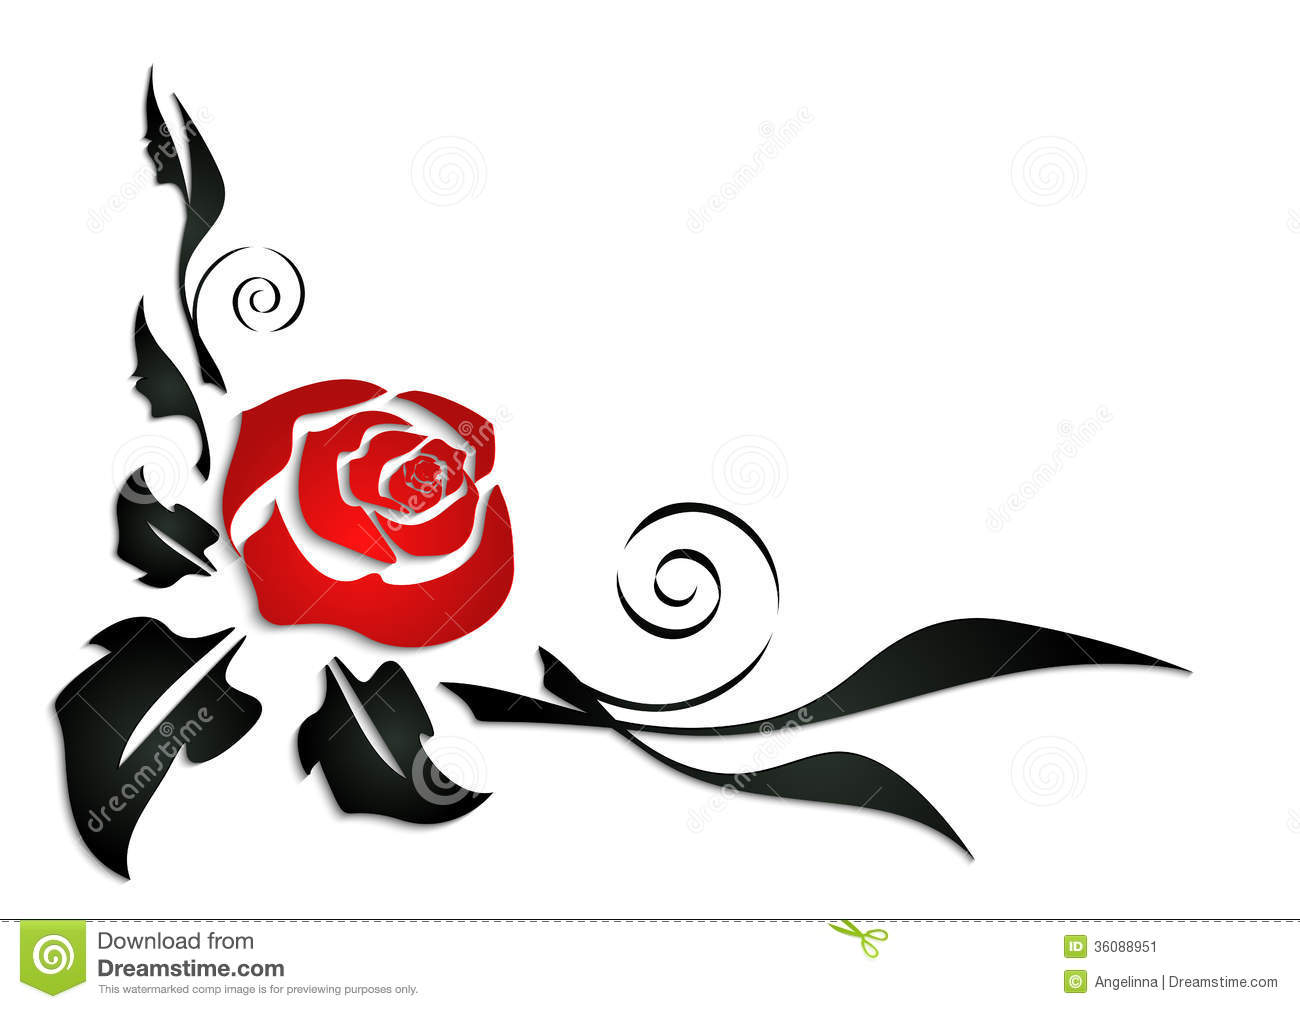 Illustration Of Abstract Rose Corner With Black Leaves